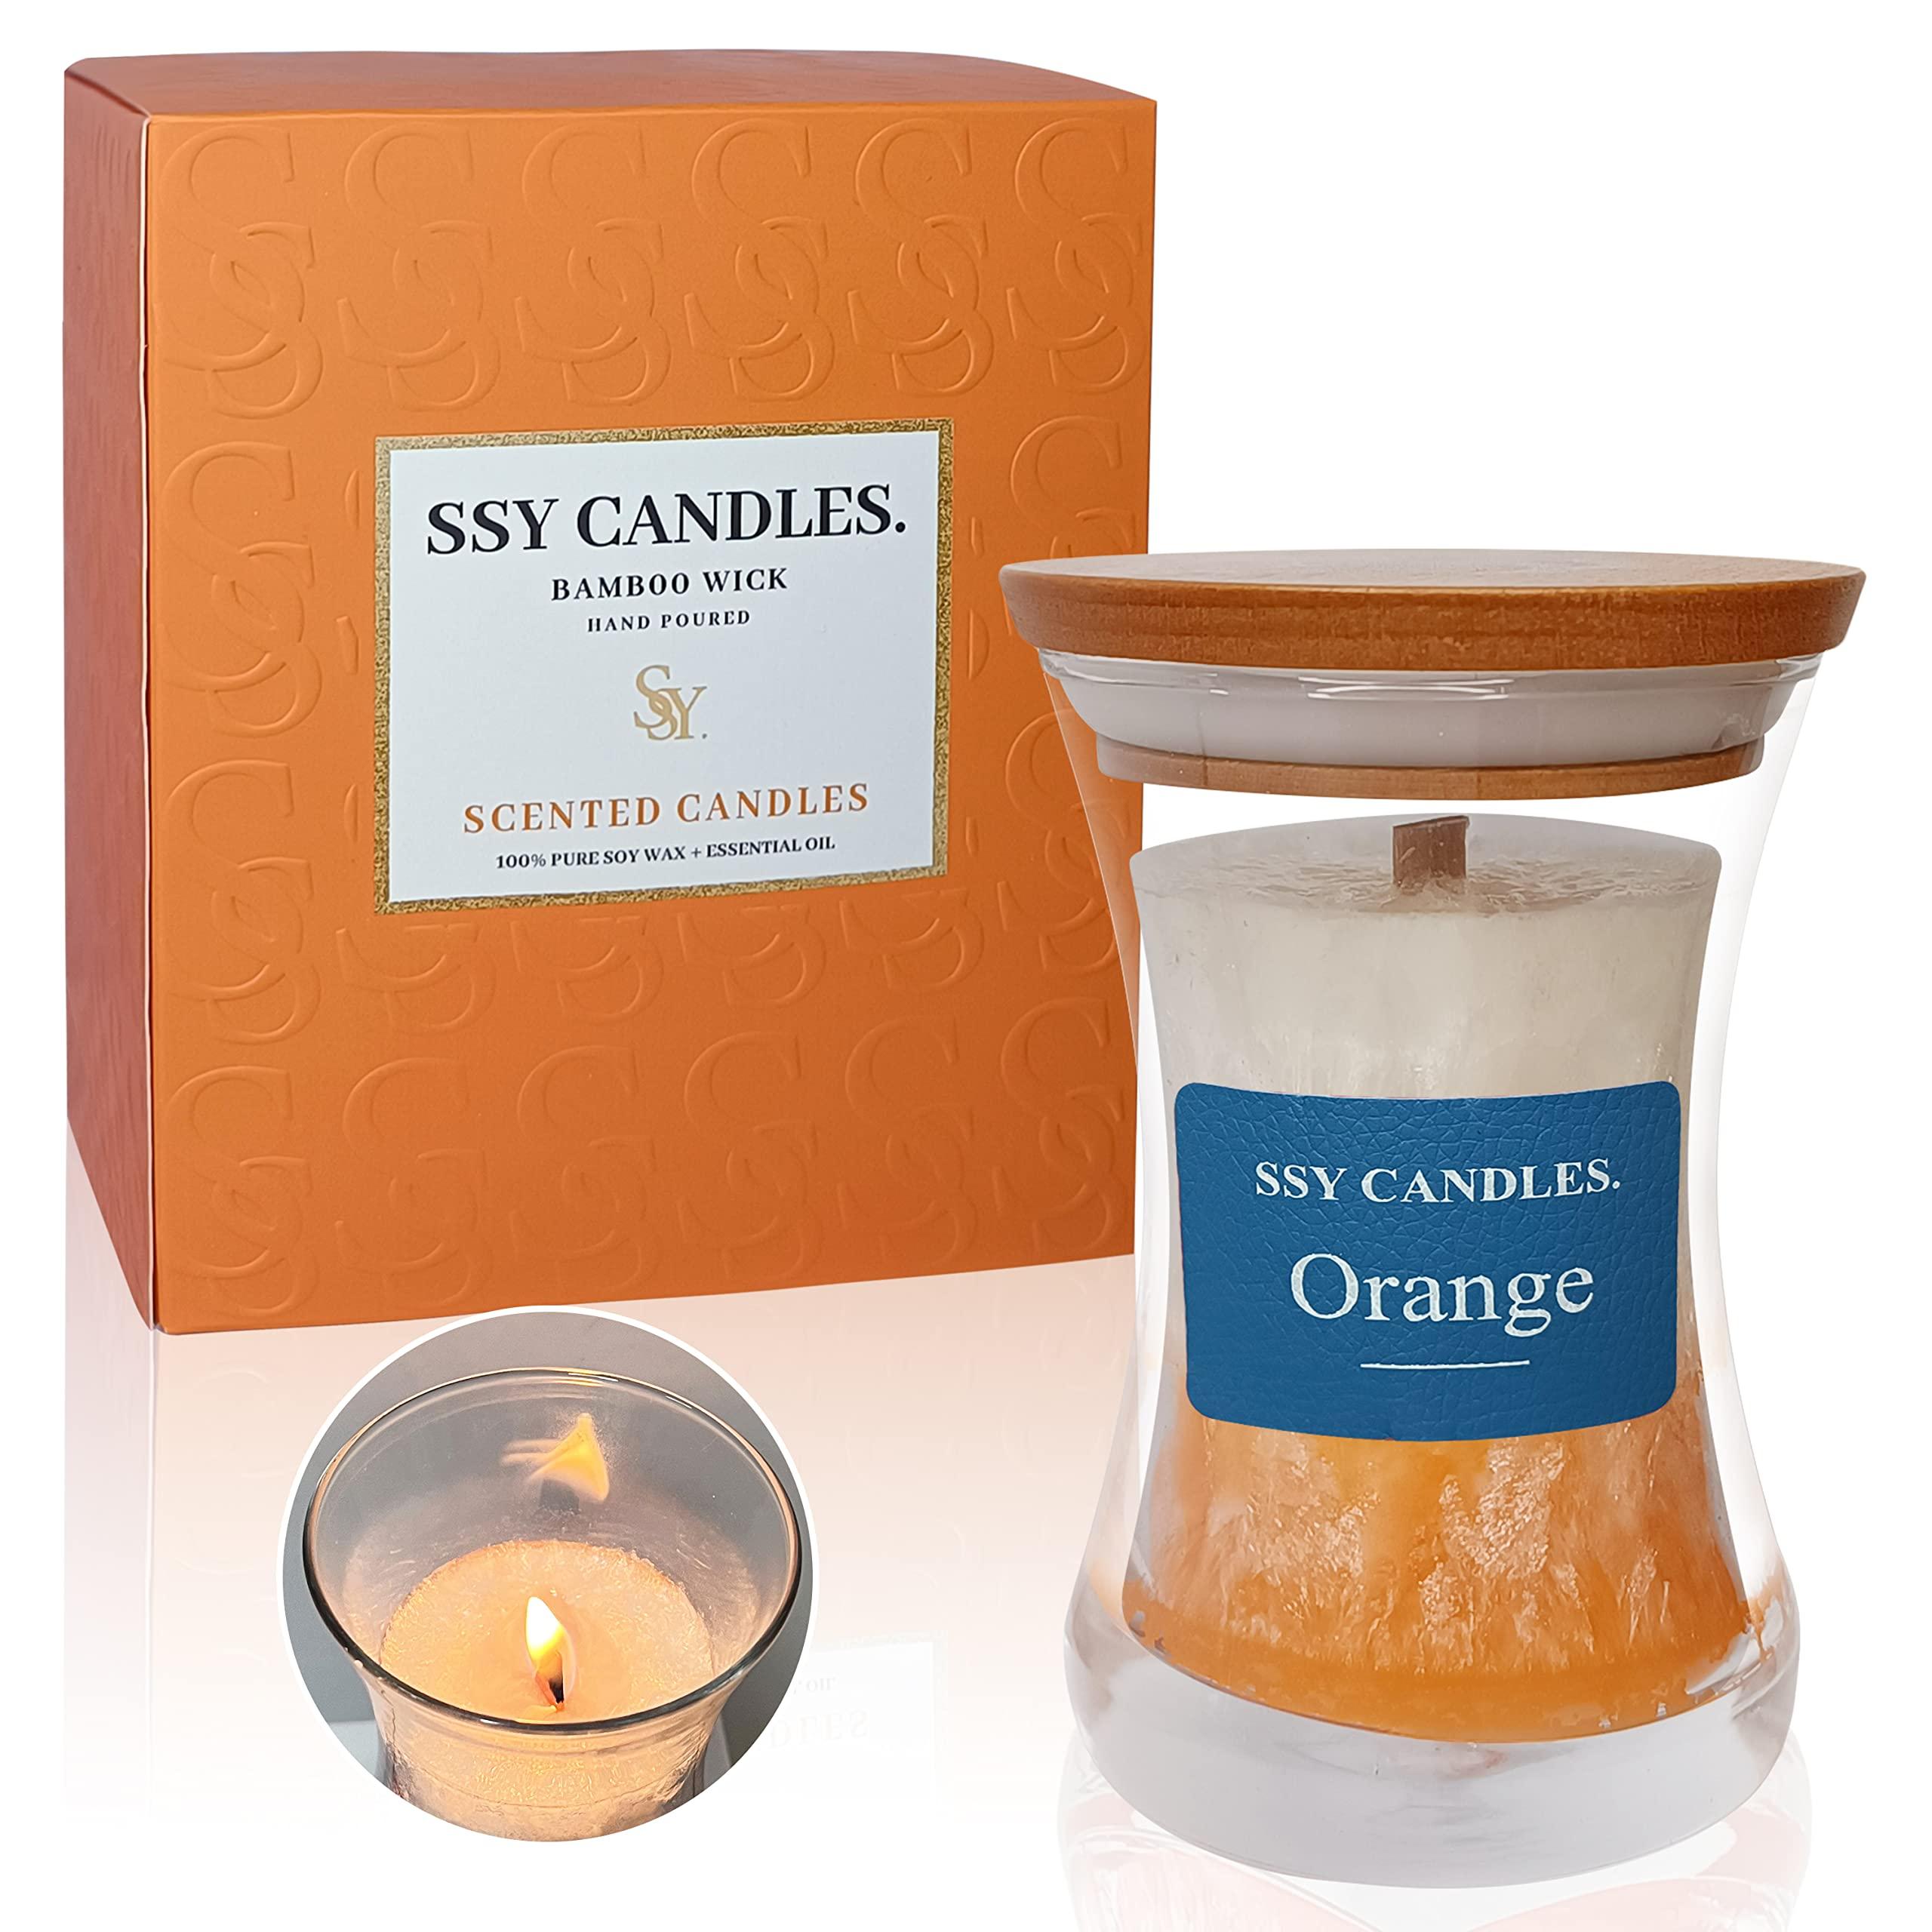 Experience Relaxation with Our Scented Jar Candle - 100% Natural Soy Wax, Burns up to 45 Hours, Aromatherapy Candle Gift for Any Occasion 0